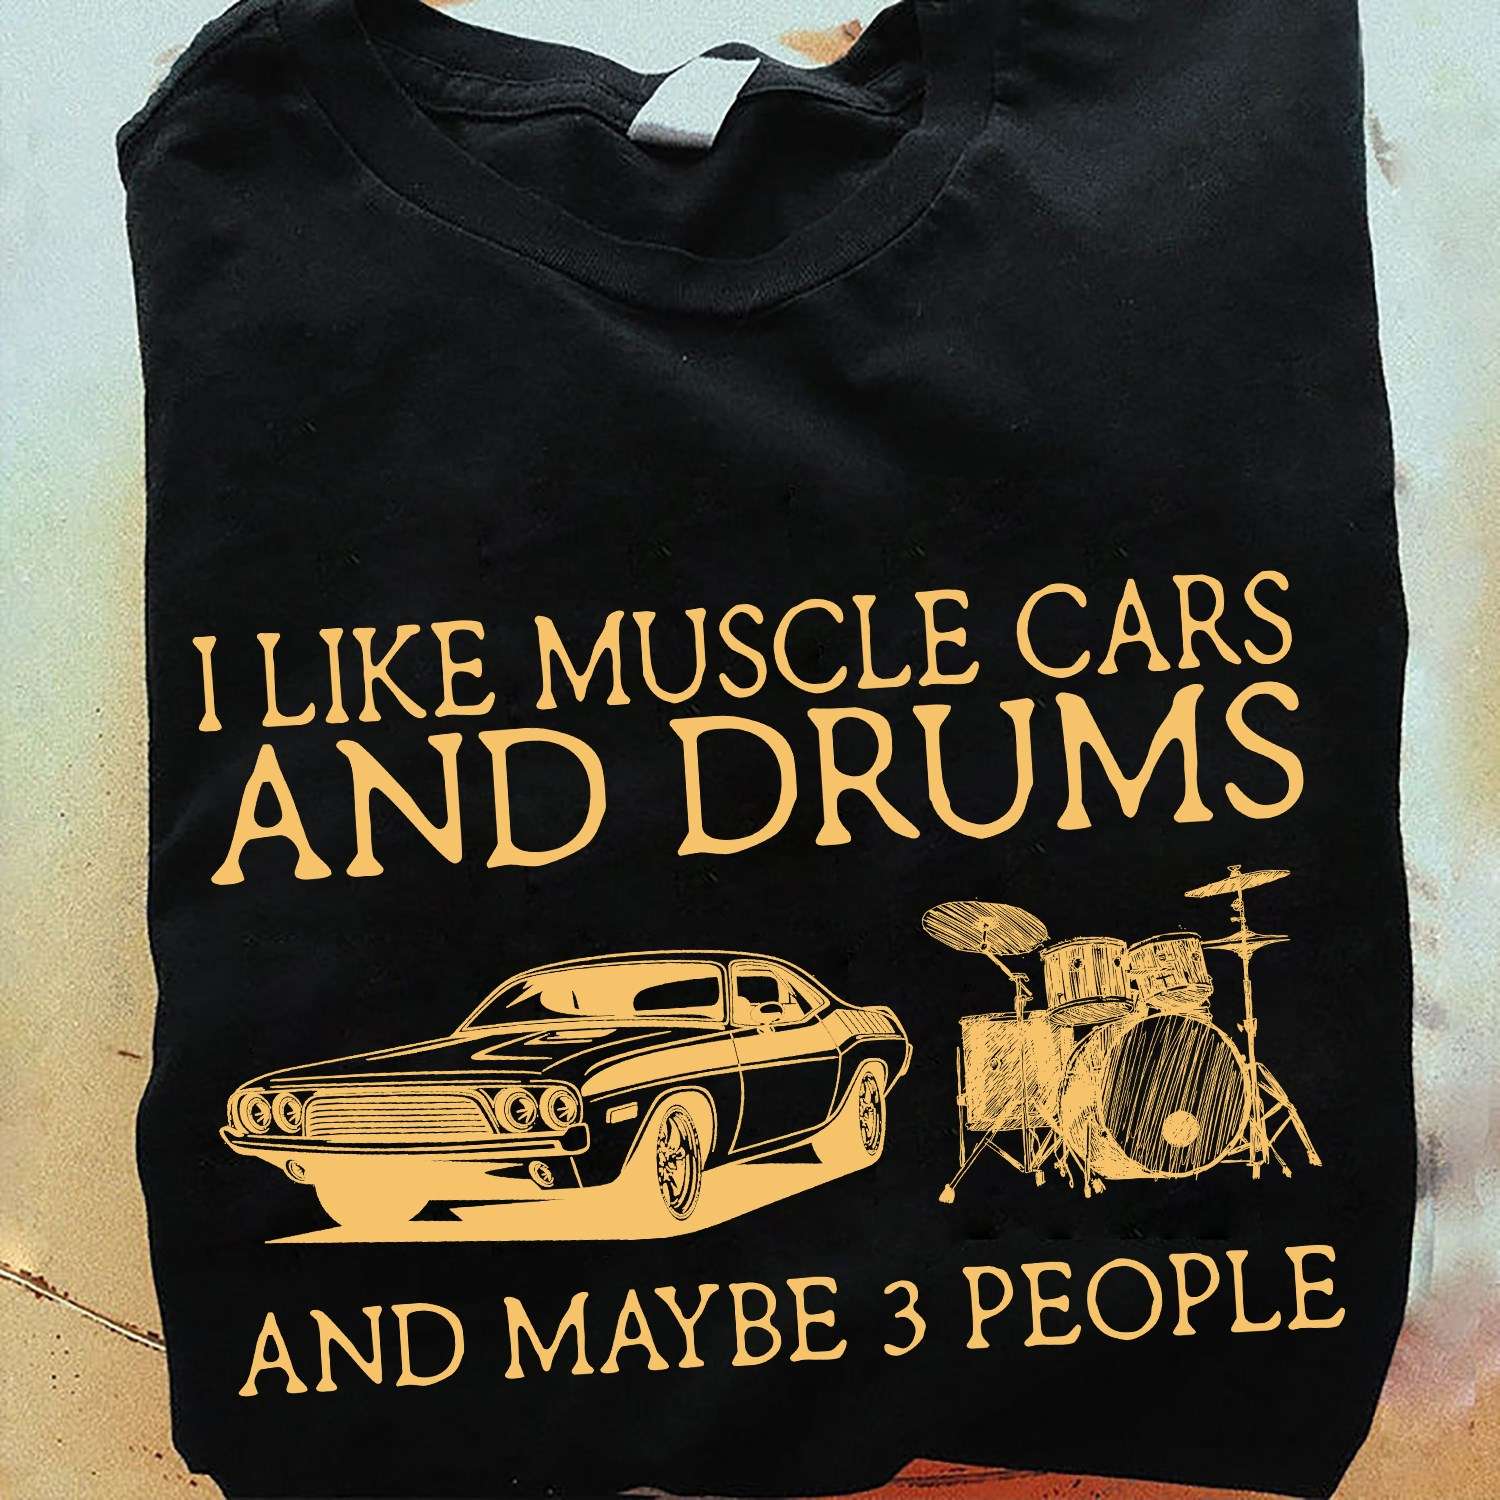 I like muscle cars and drums and maybe 3 people - Drag car racing